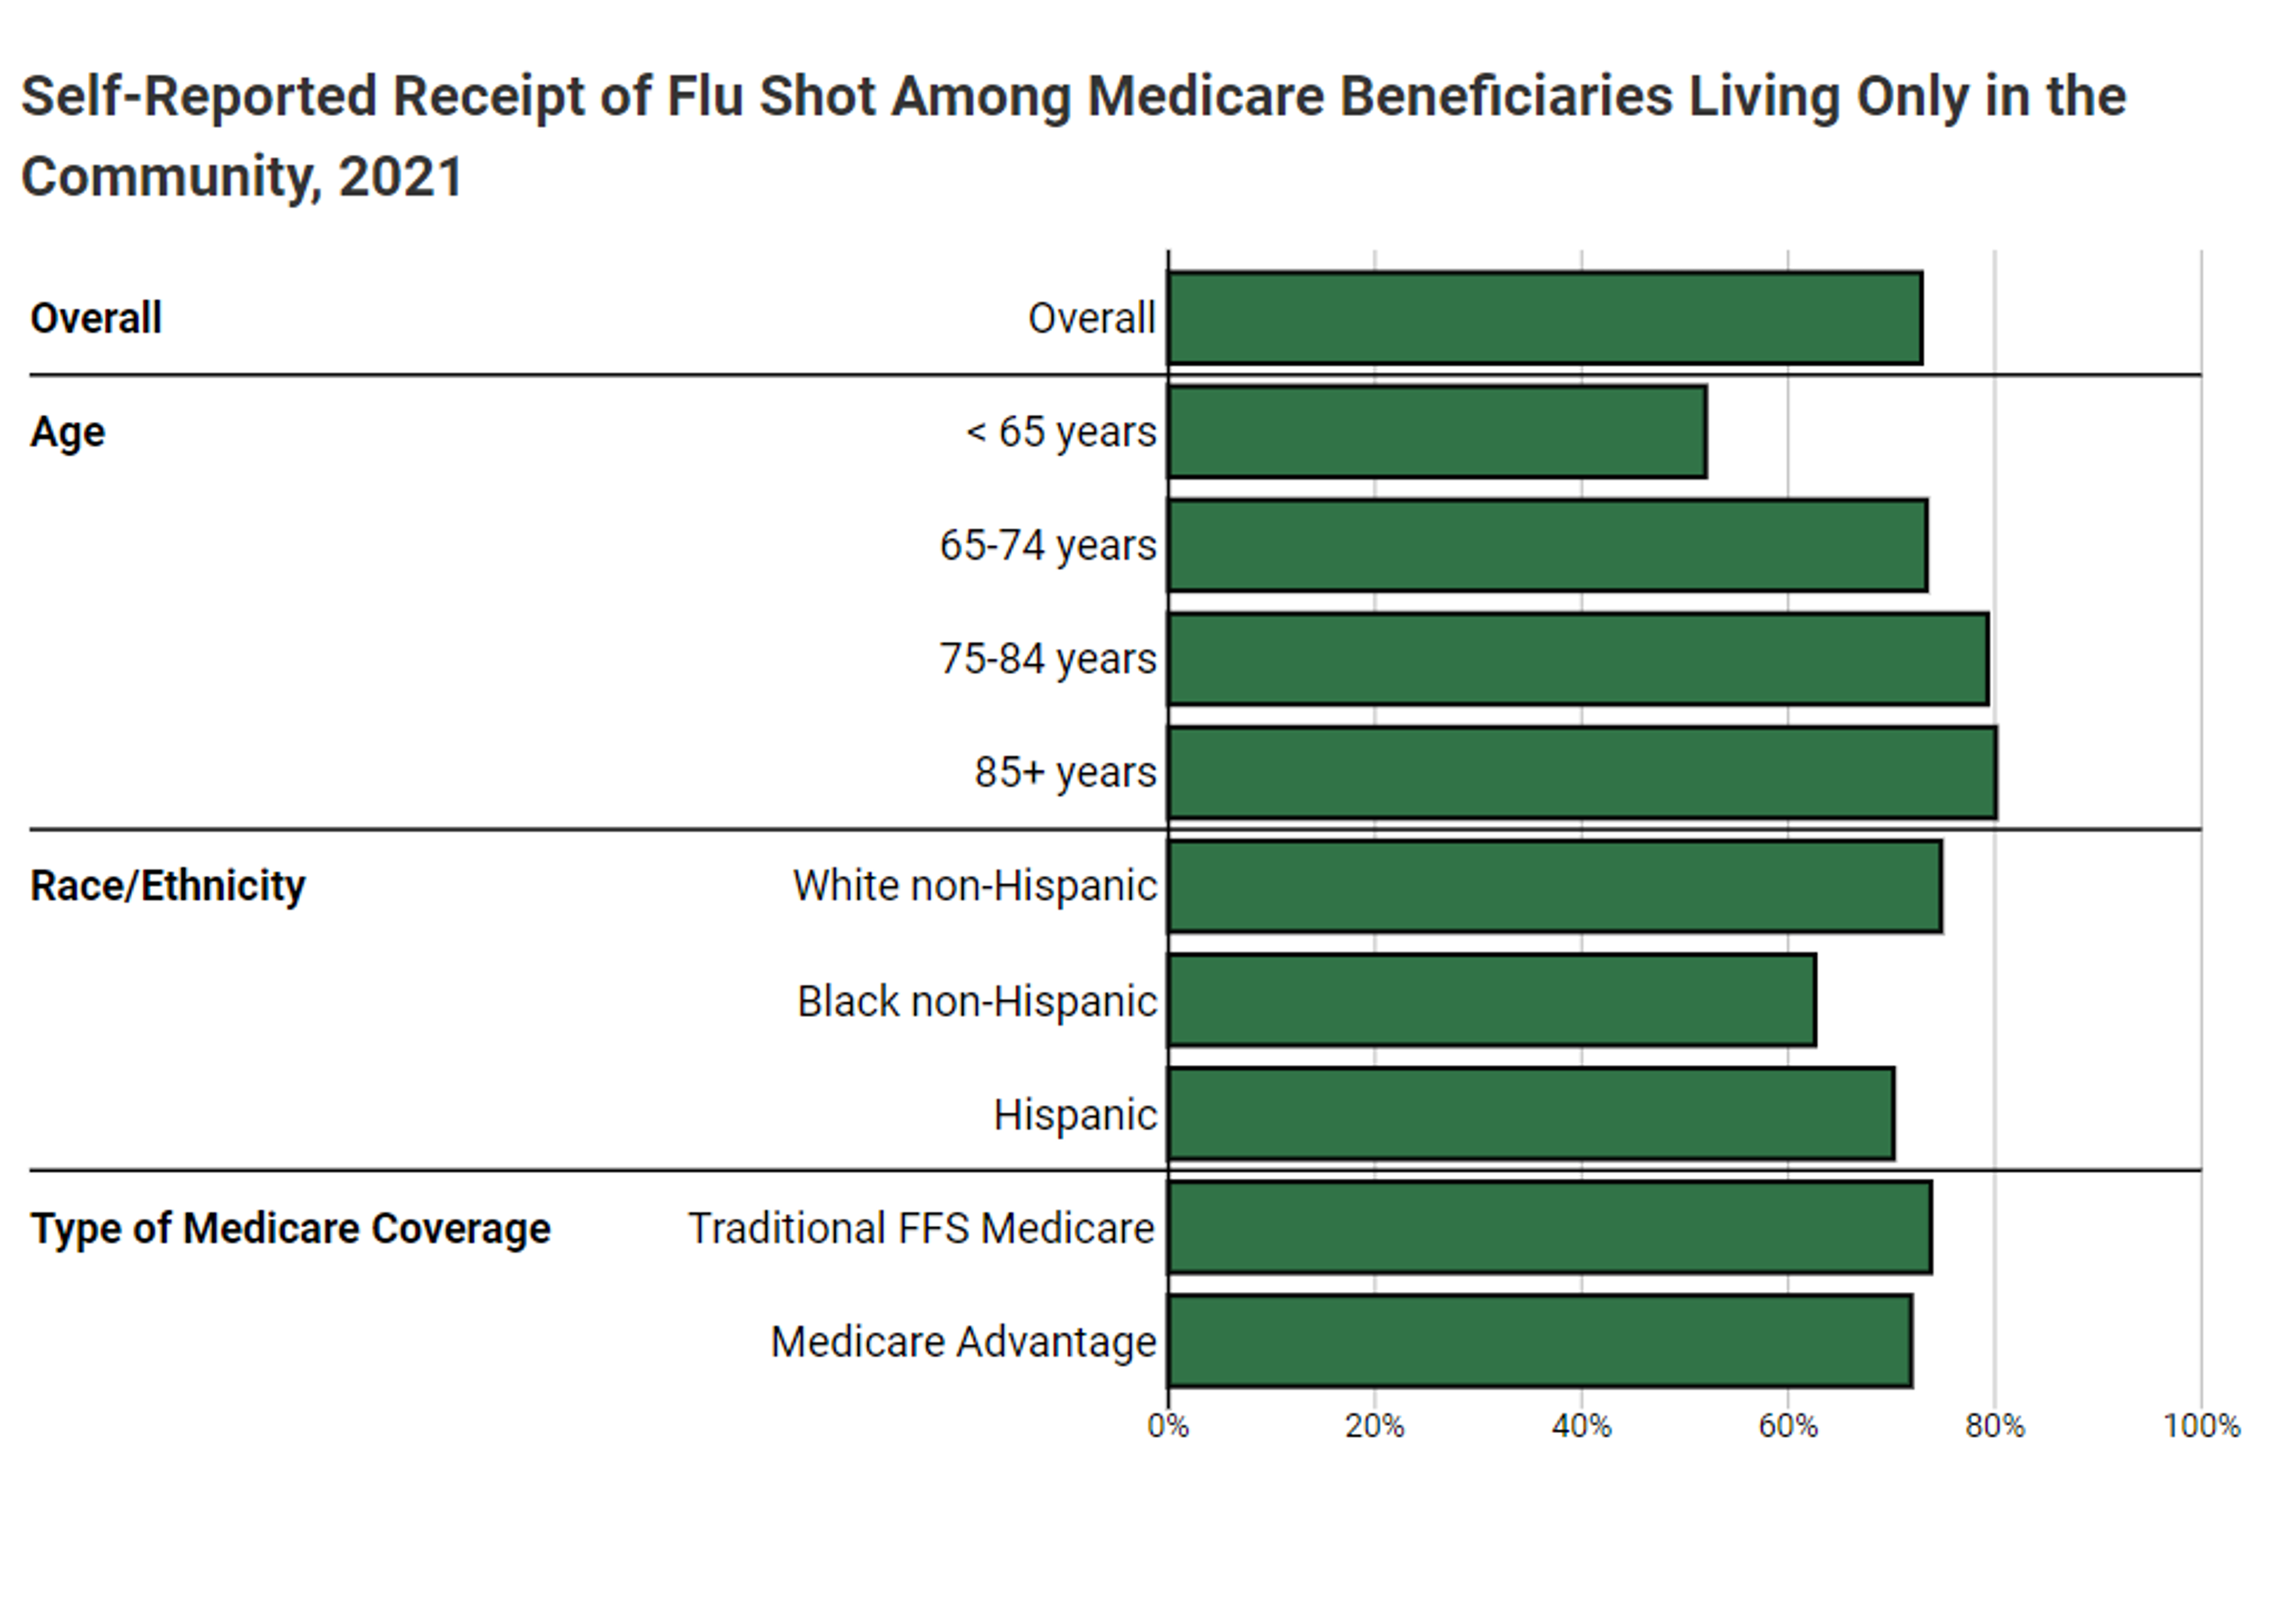 This image shows an example of a chart from the second domain, Beneficiary Health and Well-Being. The example shows self-reported receipt of the flu shot among Medicare beneficiaries living only in the community overall and by age, race/ethnicity, and type of Medicare coverage in 2020.